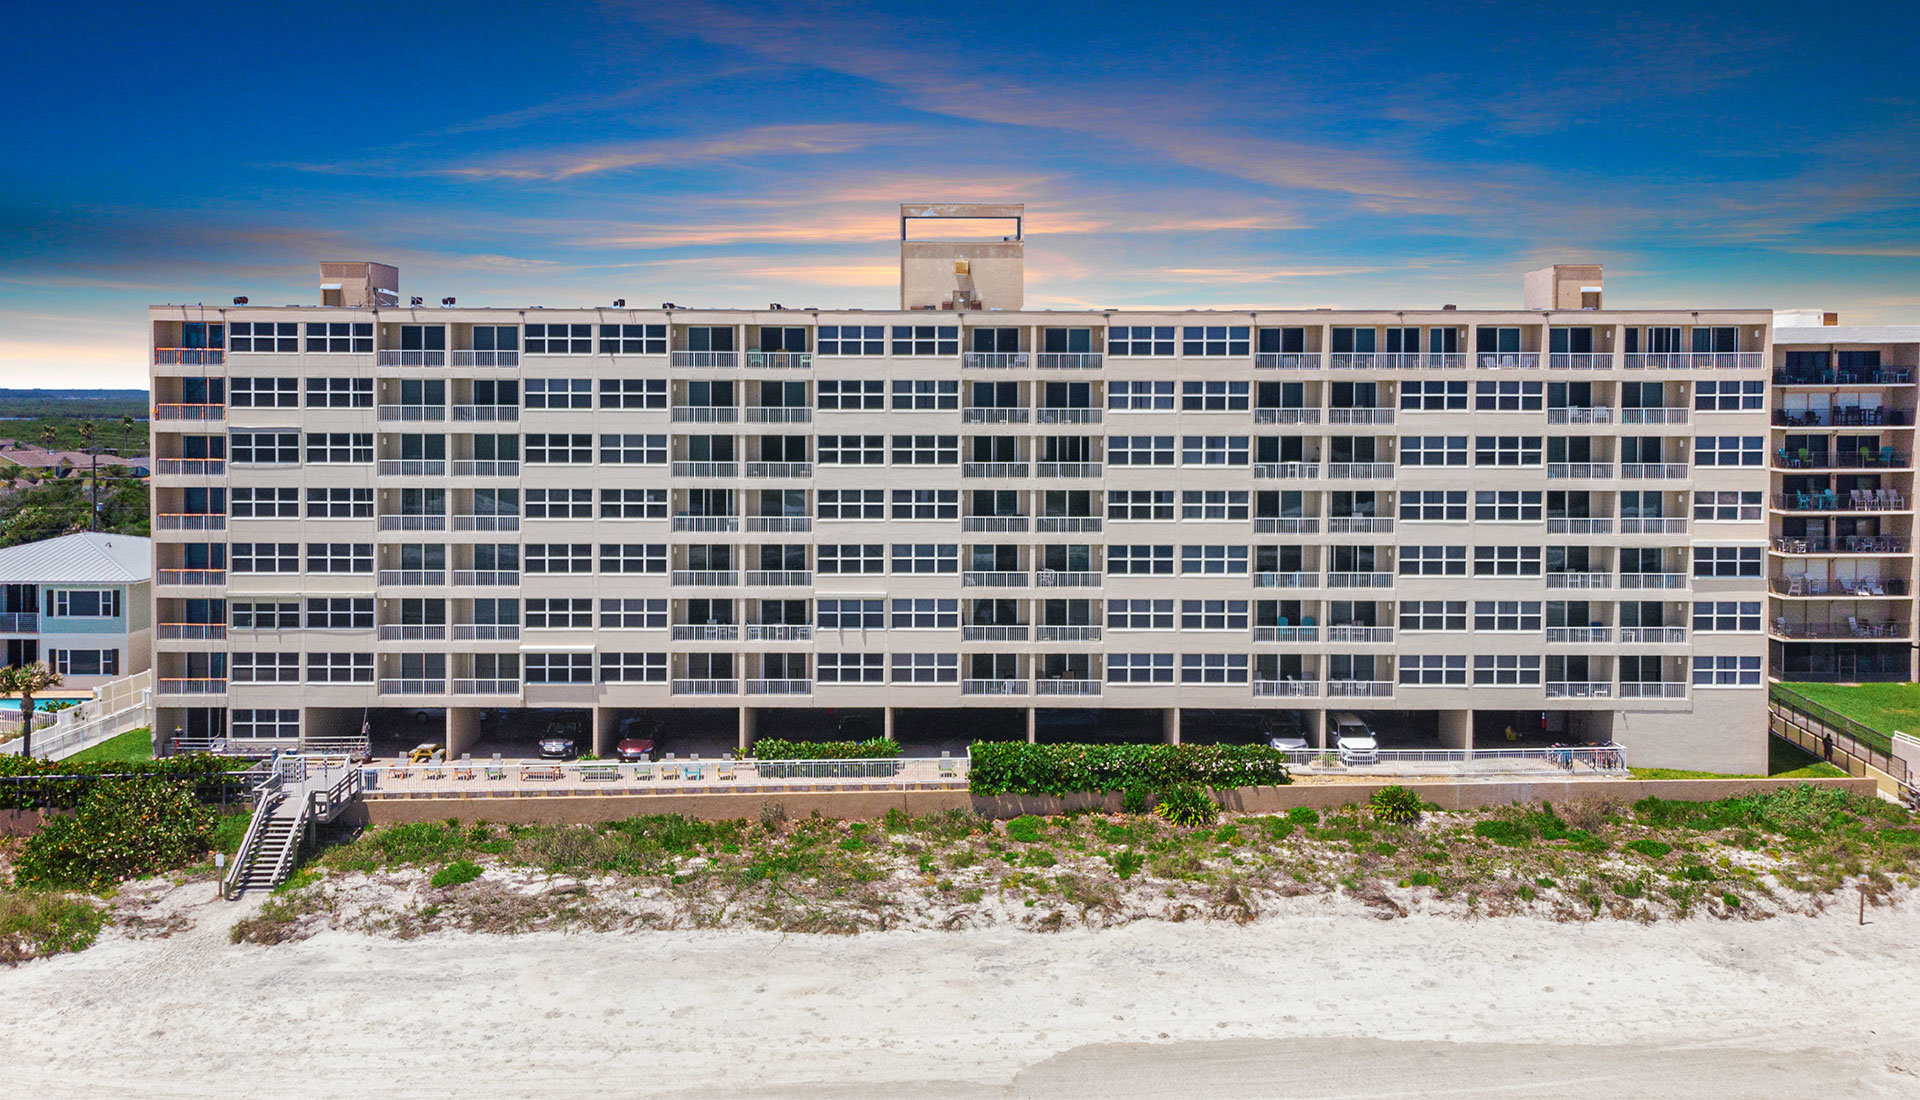 Southpoint oceanfront condos for sale in Ponce Inlet, FL - 4453 S Atlantic 